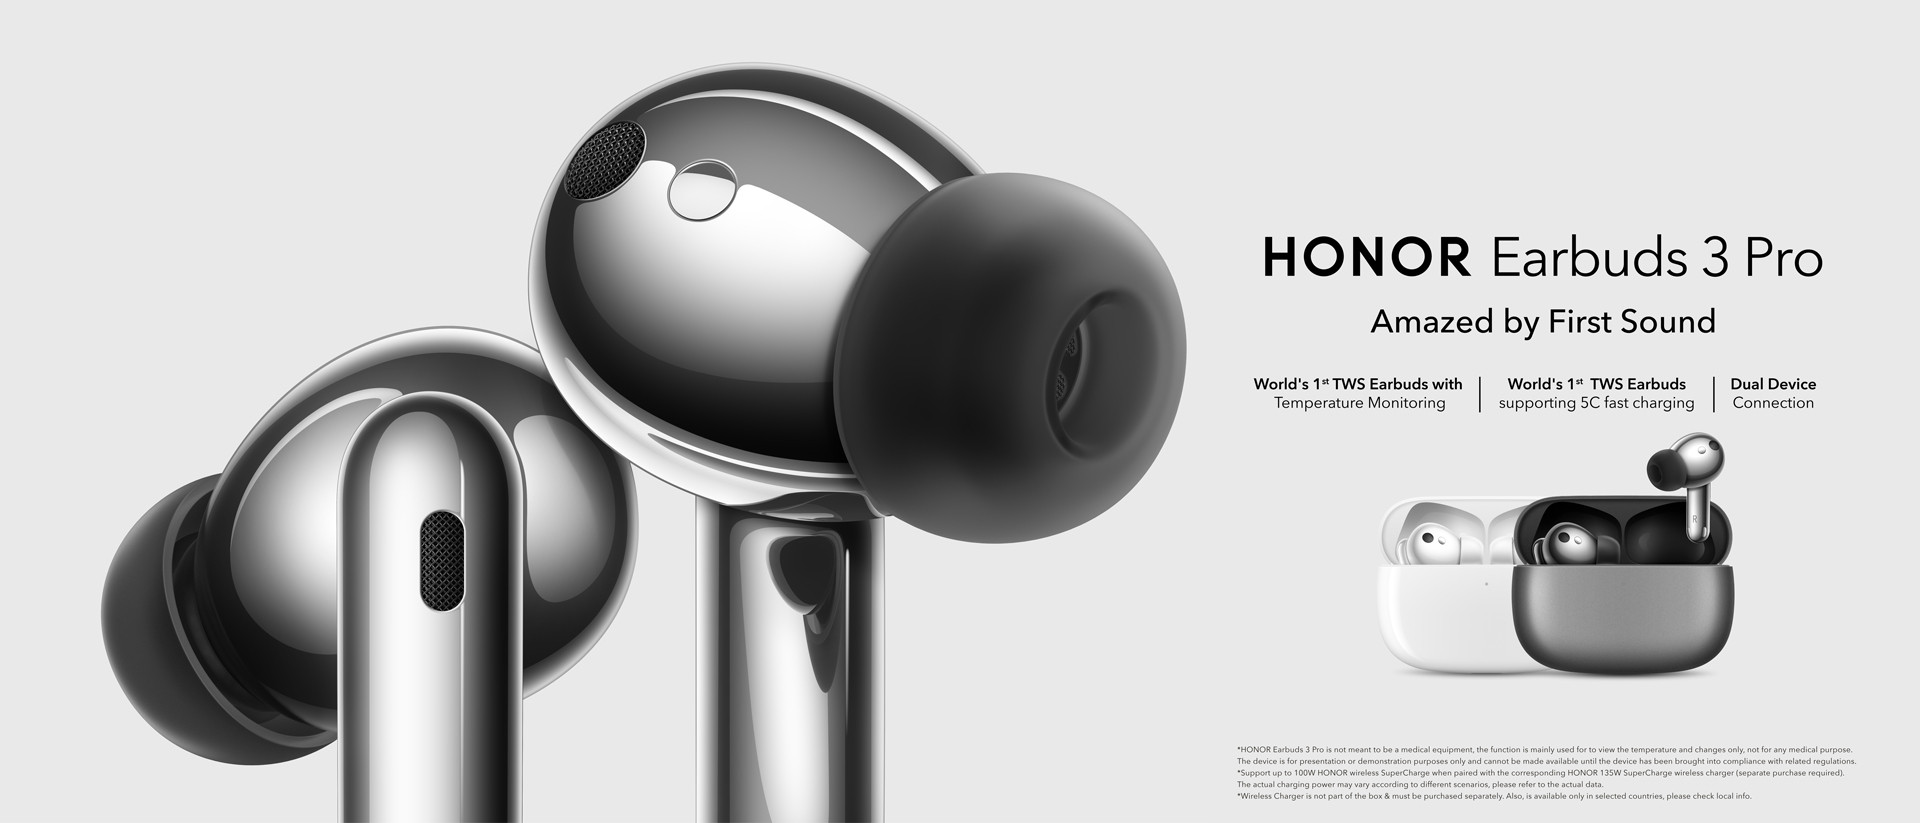 honor earbuds 3 pro.